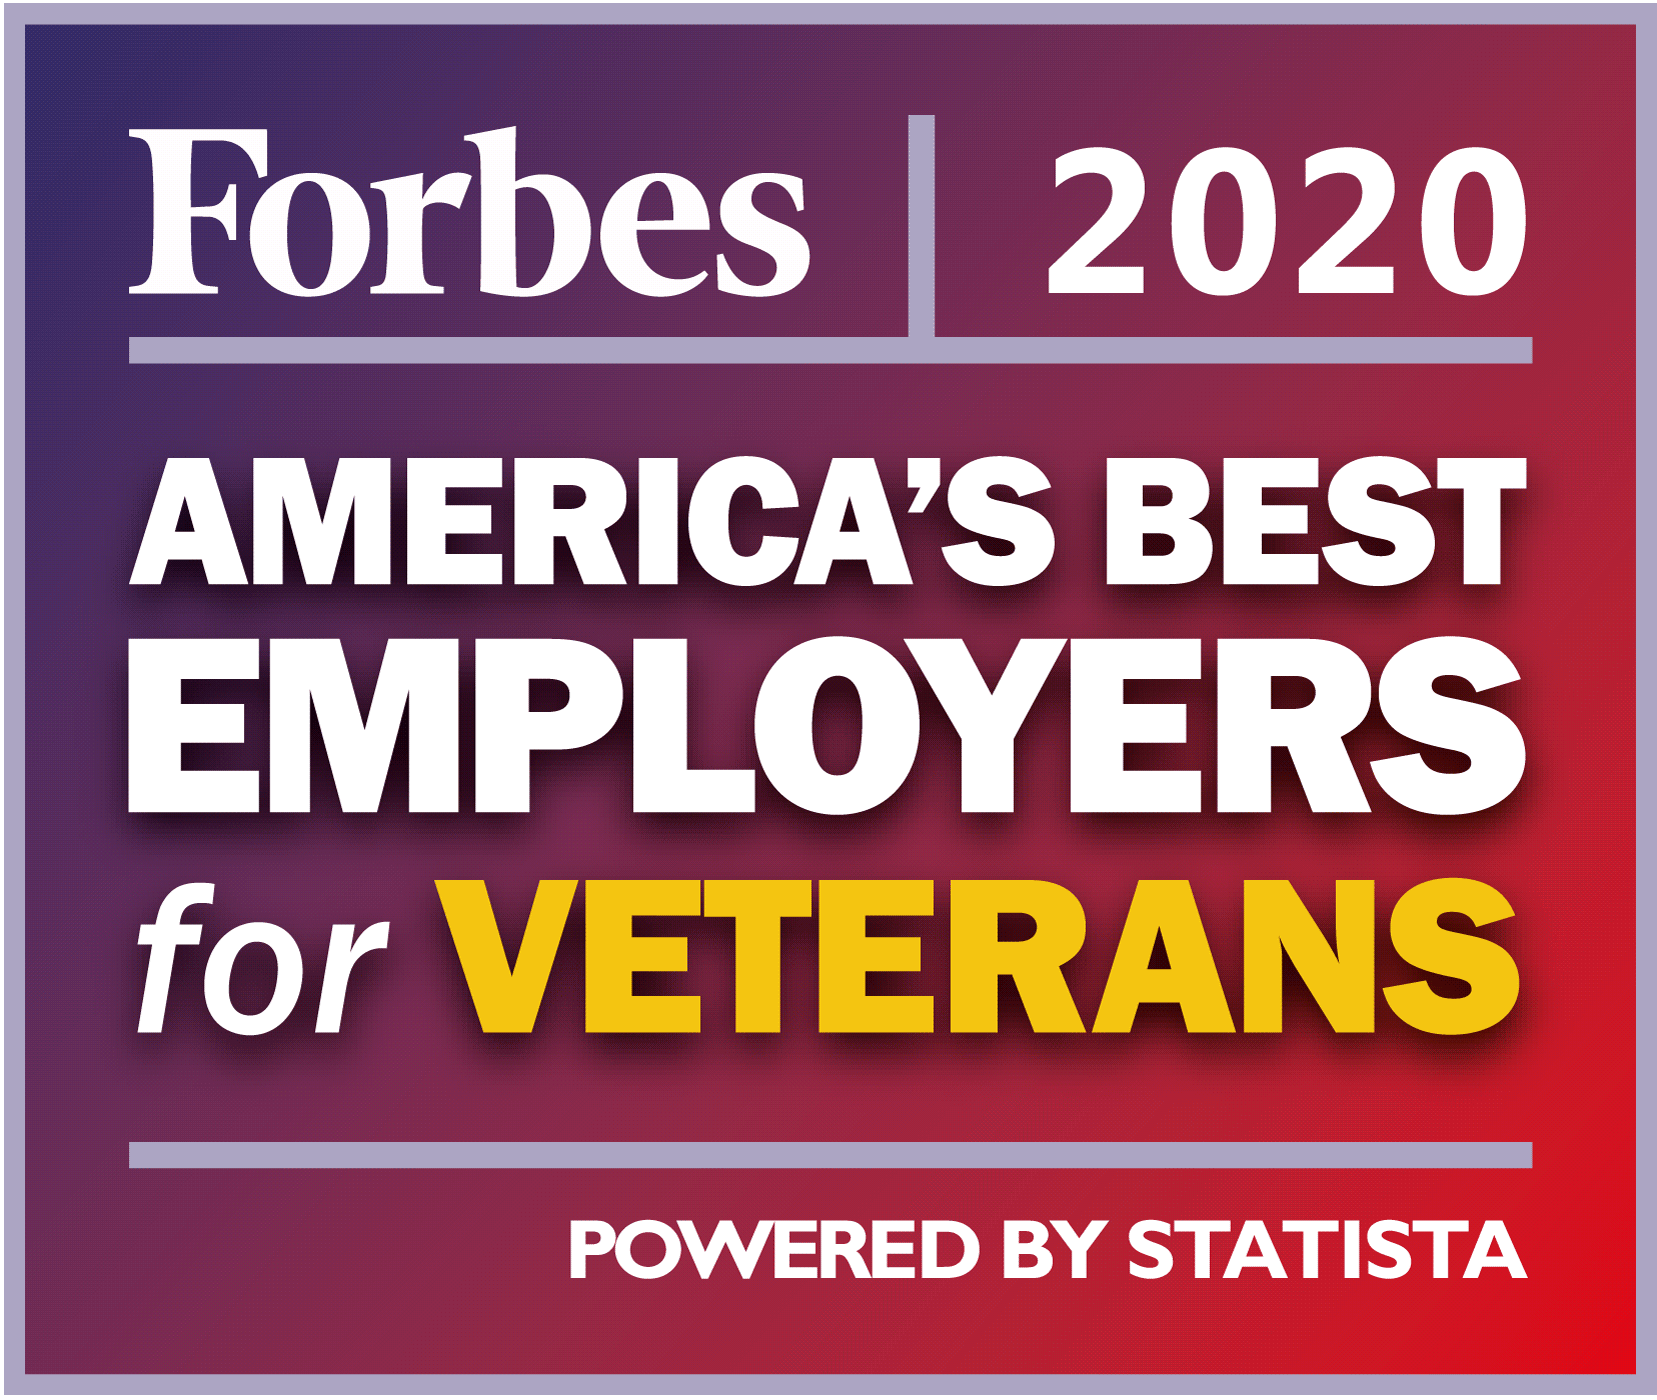 Forbes 2020 America's Best Employers for Veterans